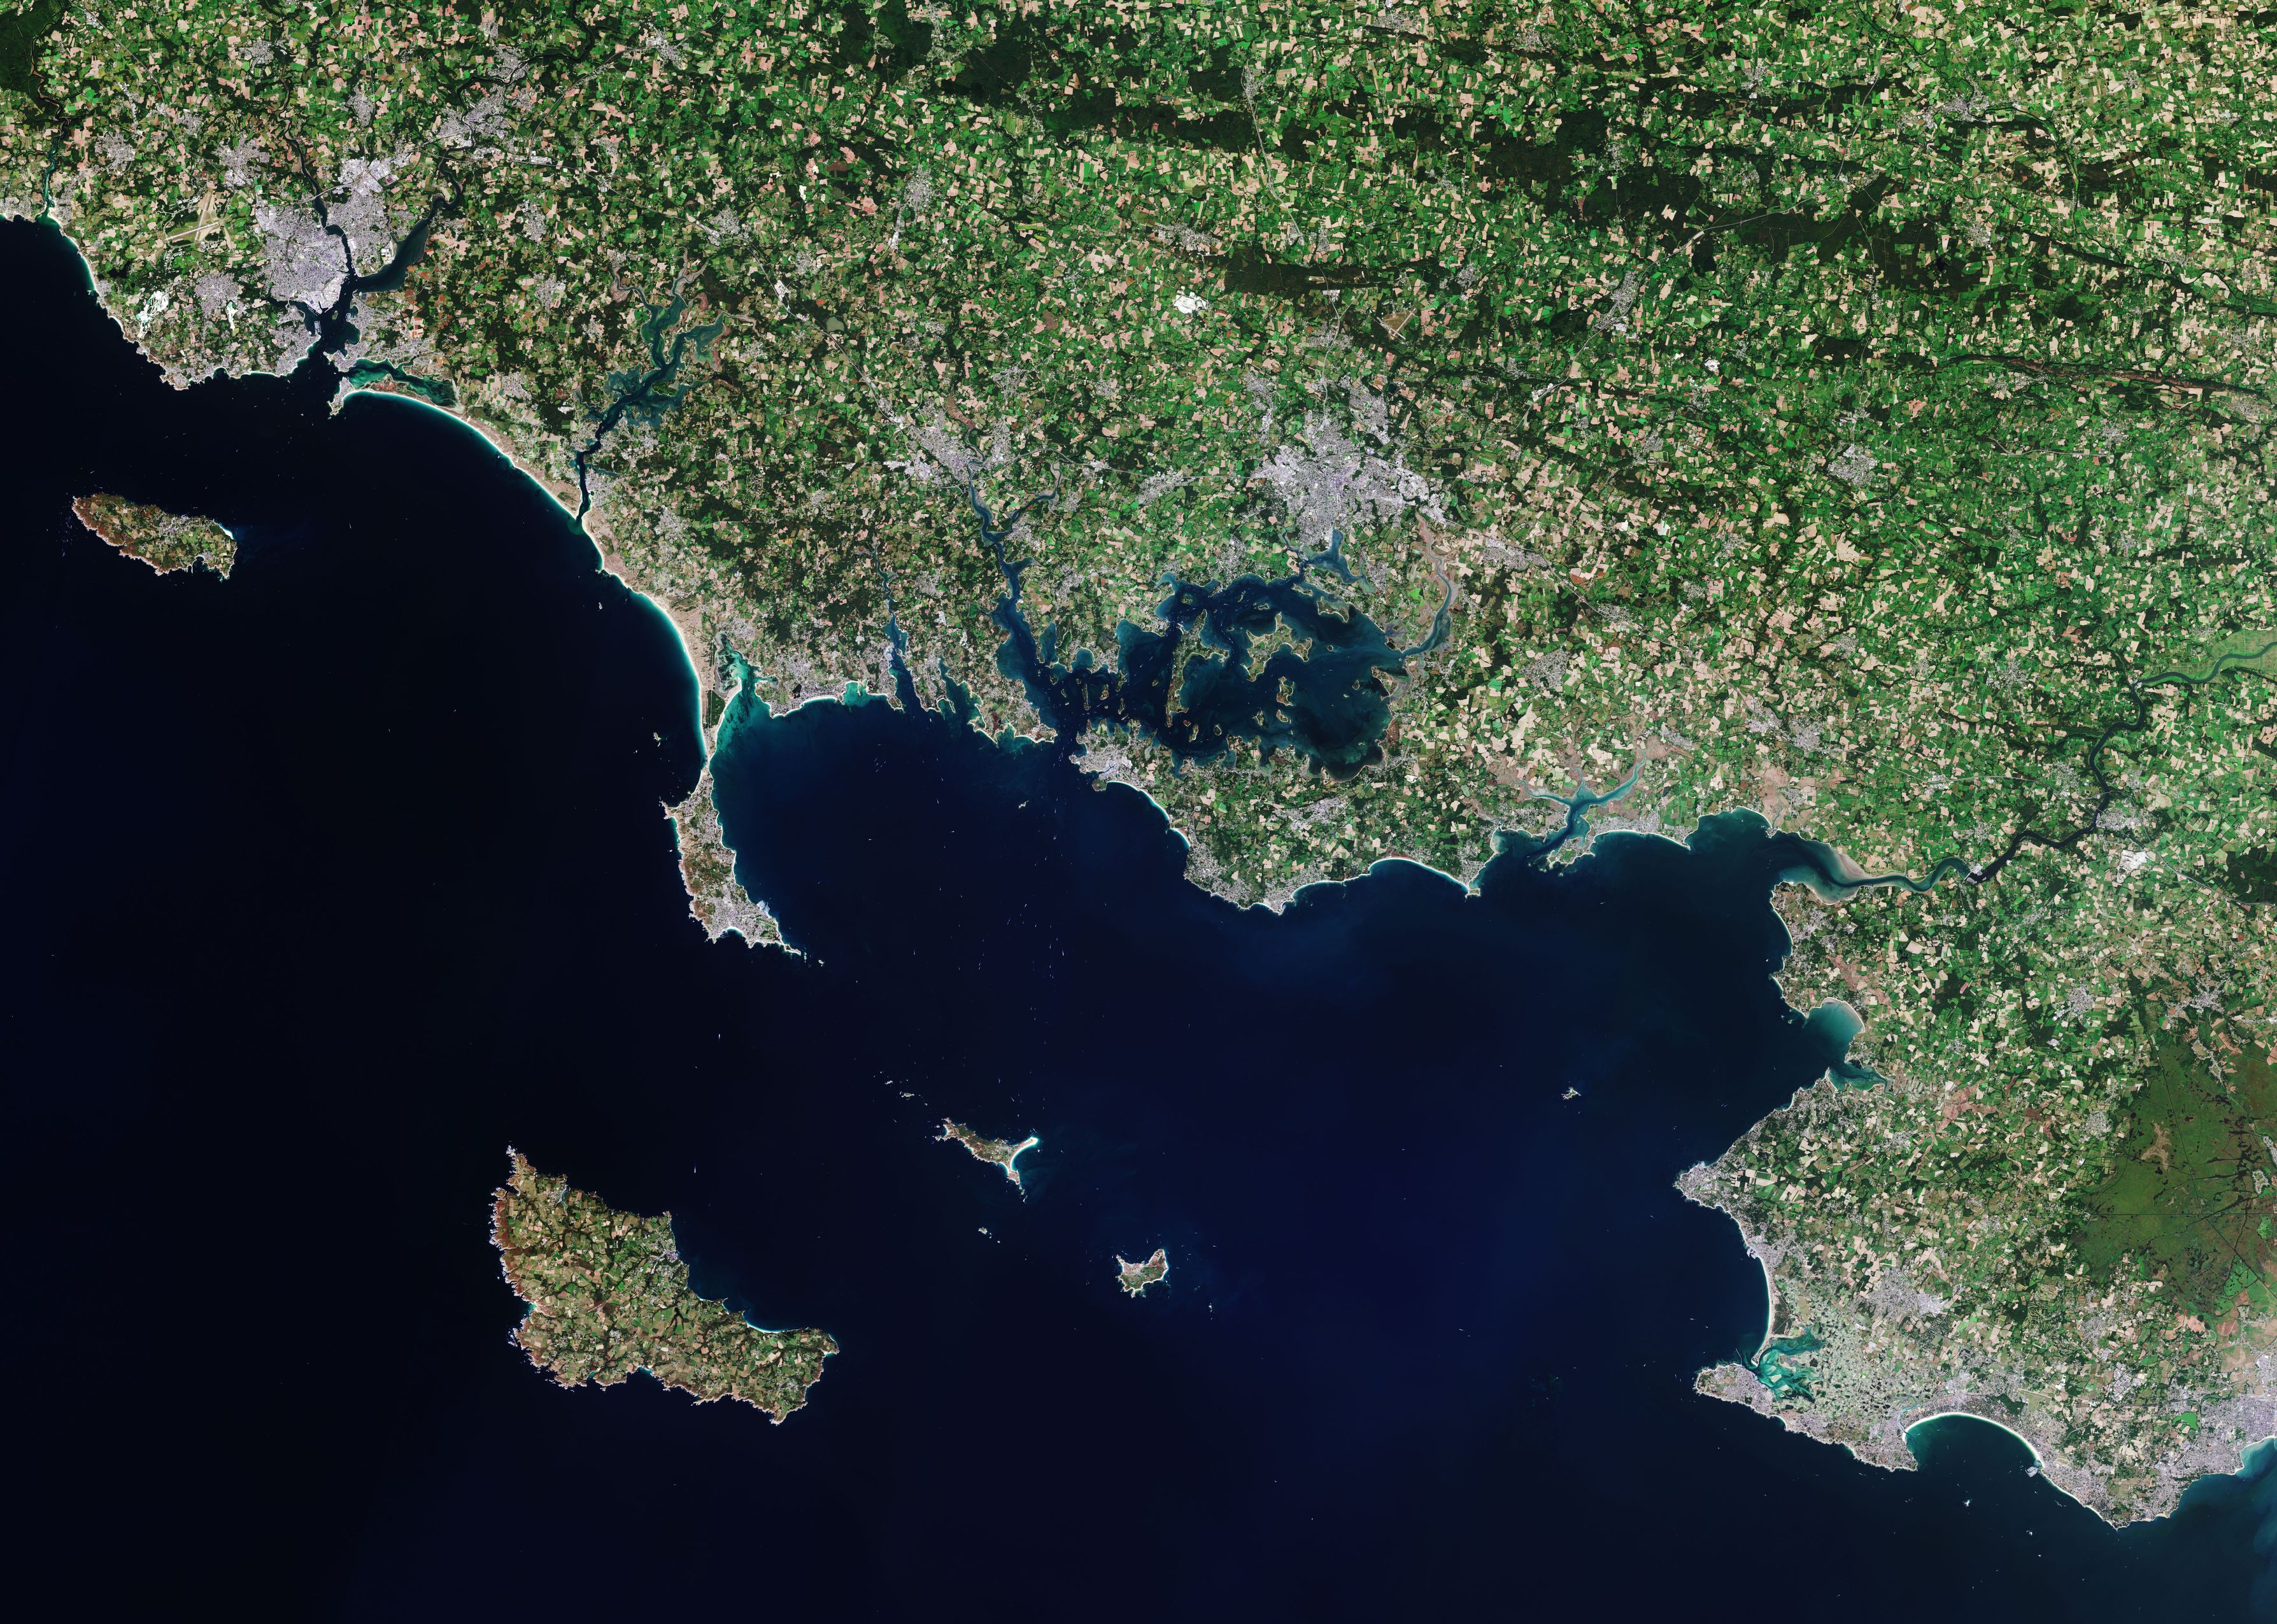 The Copernicus Sentinel-2 mission takes us over Morbihan – a French department in the south of Brittany. Credit: Contains modified Copernicus Sentinel data (2020), processed by ESA, CC BY-SA 3.0 IGO